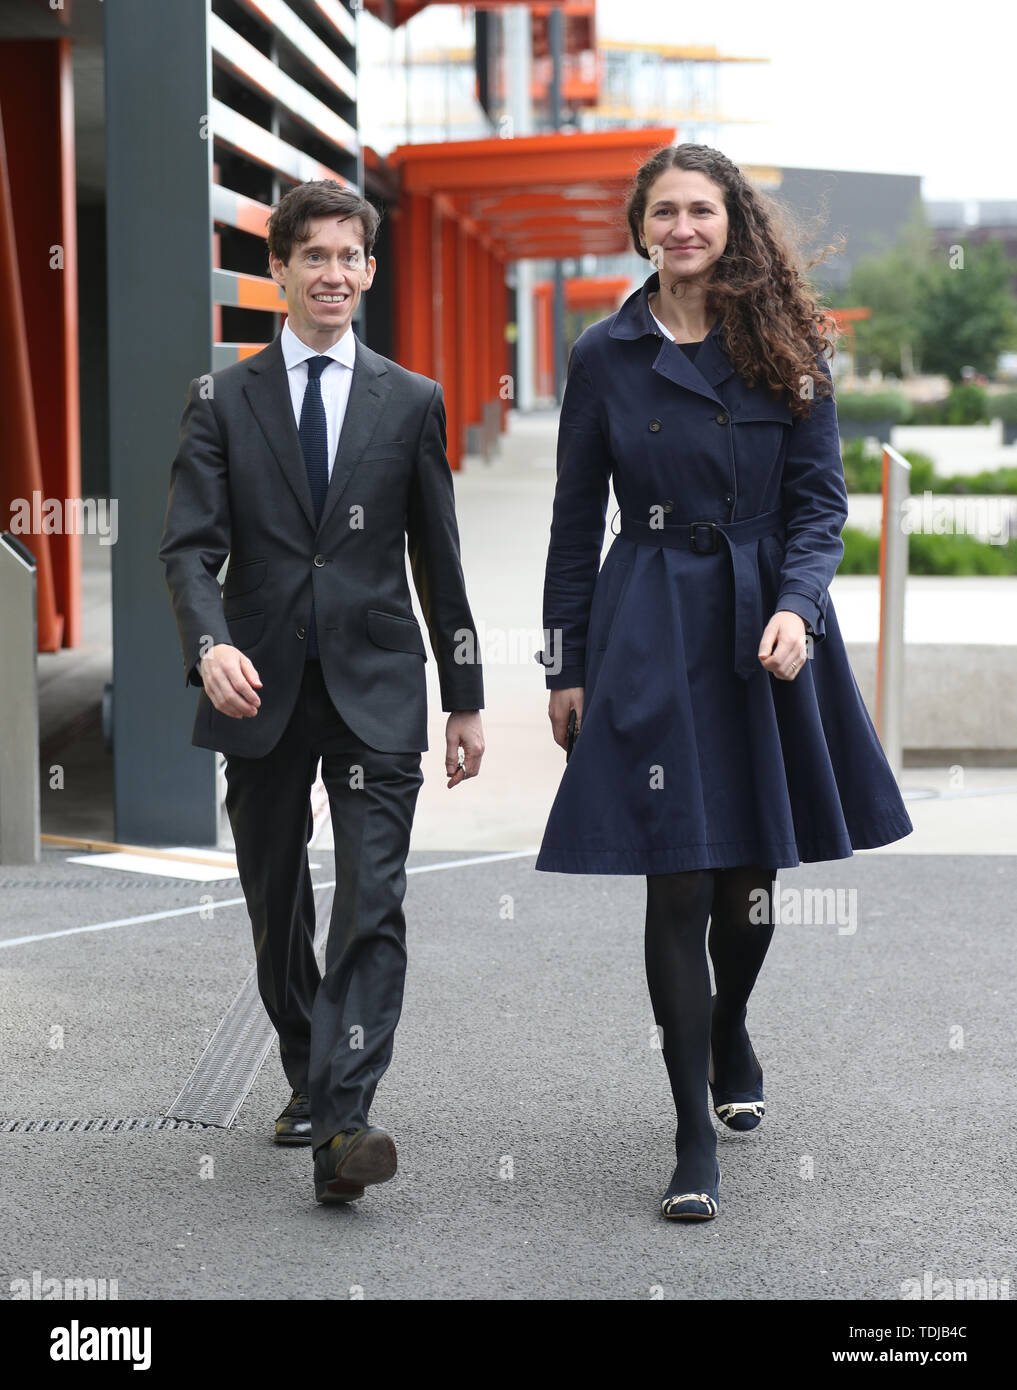 Conservative party leadership contender Rory Stewart and wife Shoshana  arrive at Here East studios in Stratford, east London, ahead of the live  television debate for the candidates for leadership of the Conservative